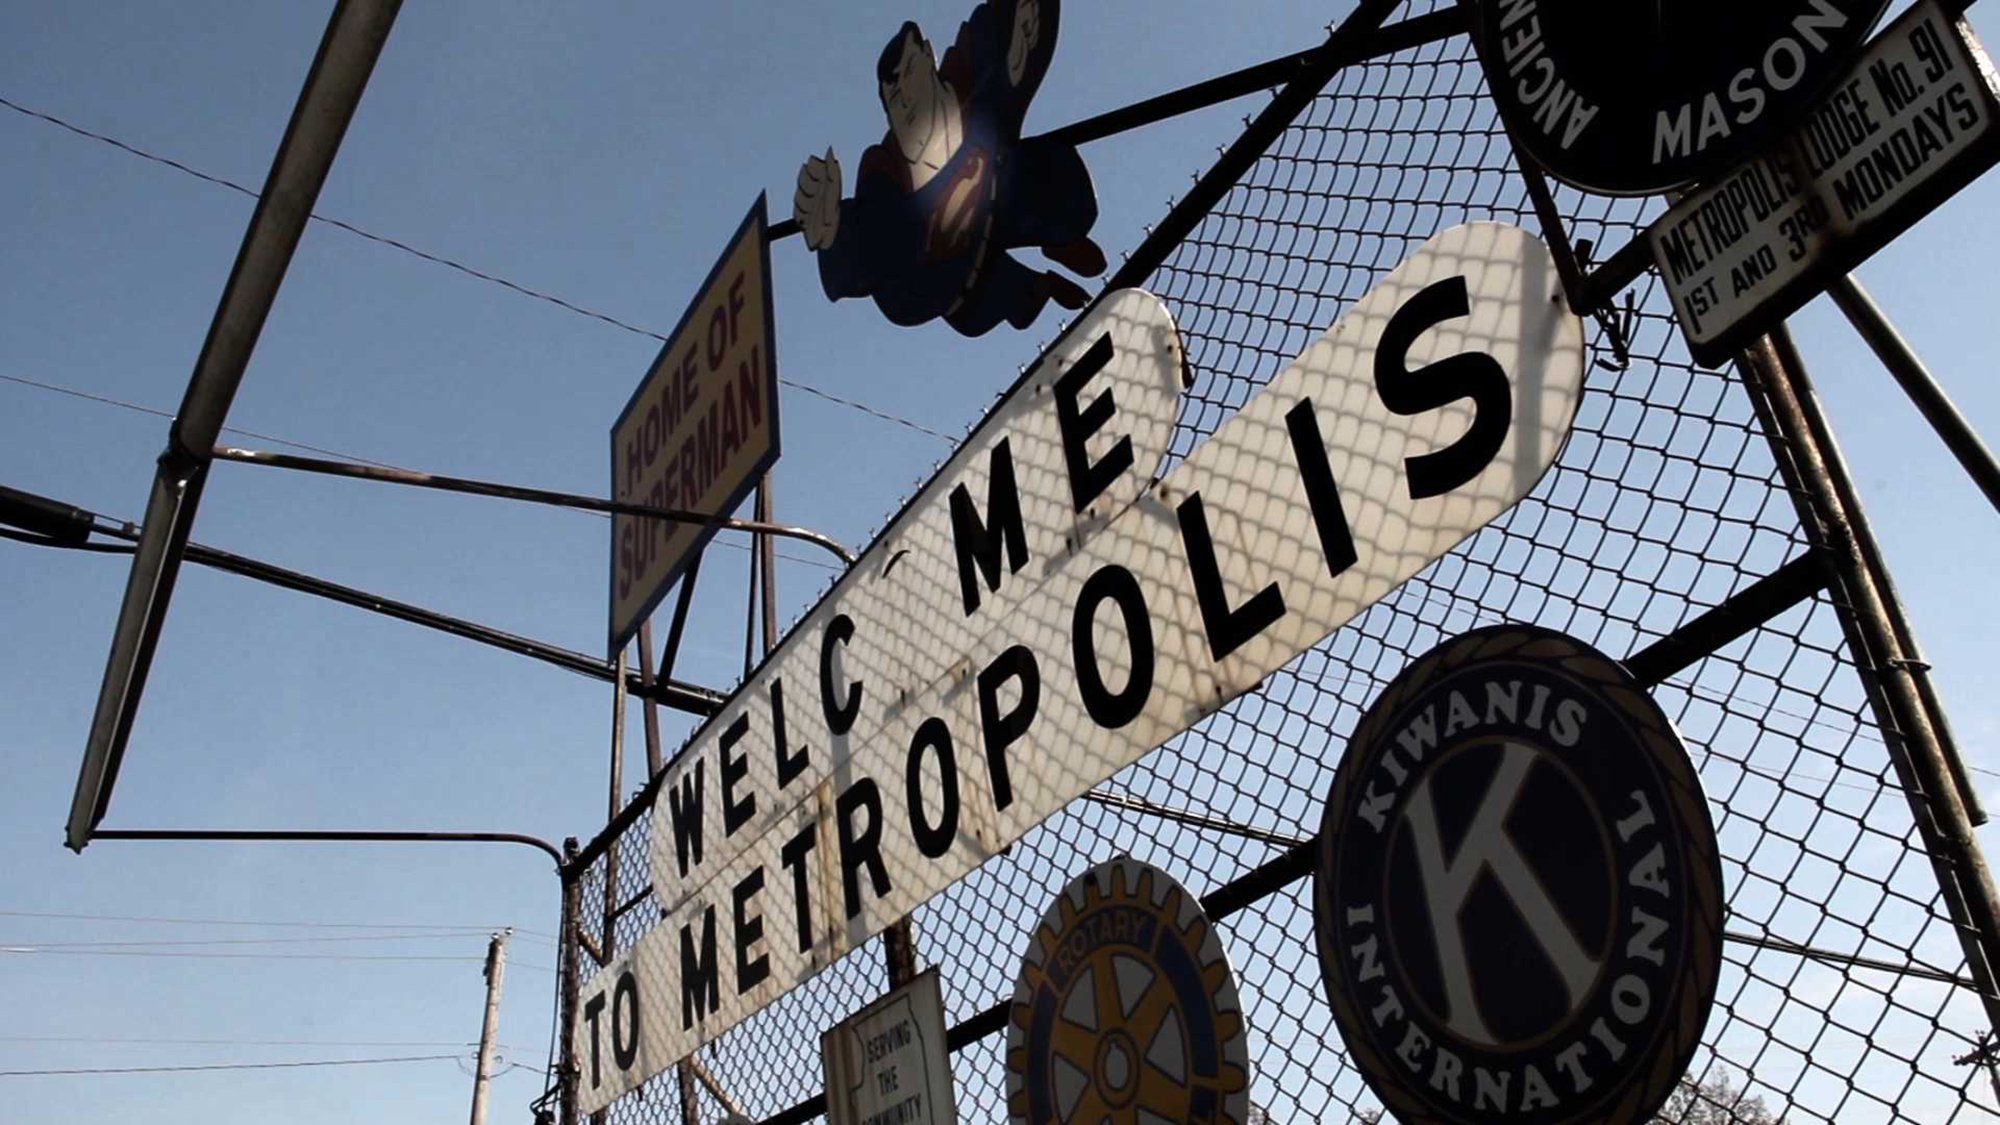 Welcome to Metropolis by Nick Jordan and Jacob Cartright. Part of one minute vol 10, curated by Kerry Baldry